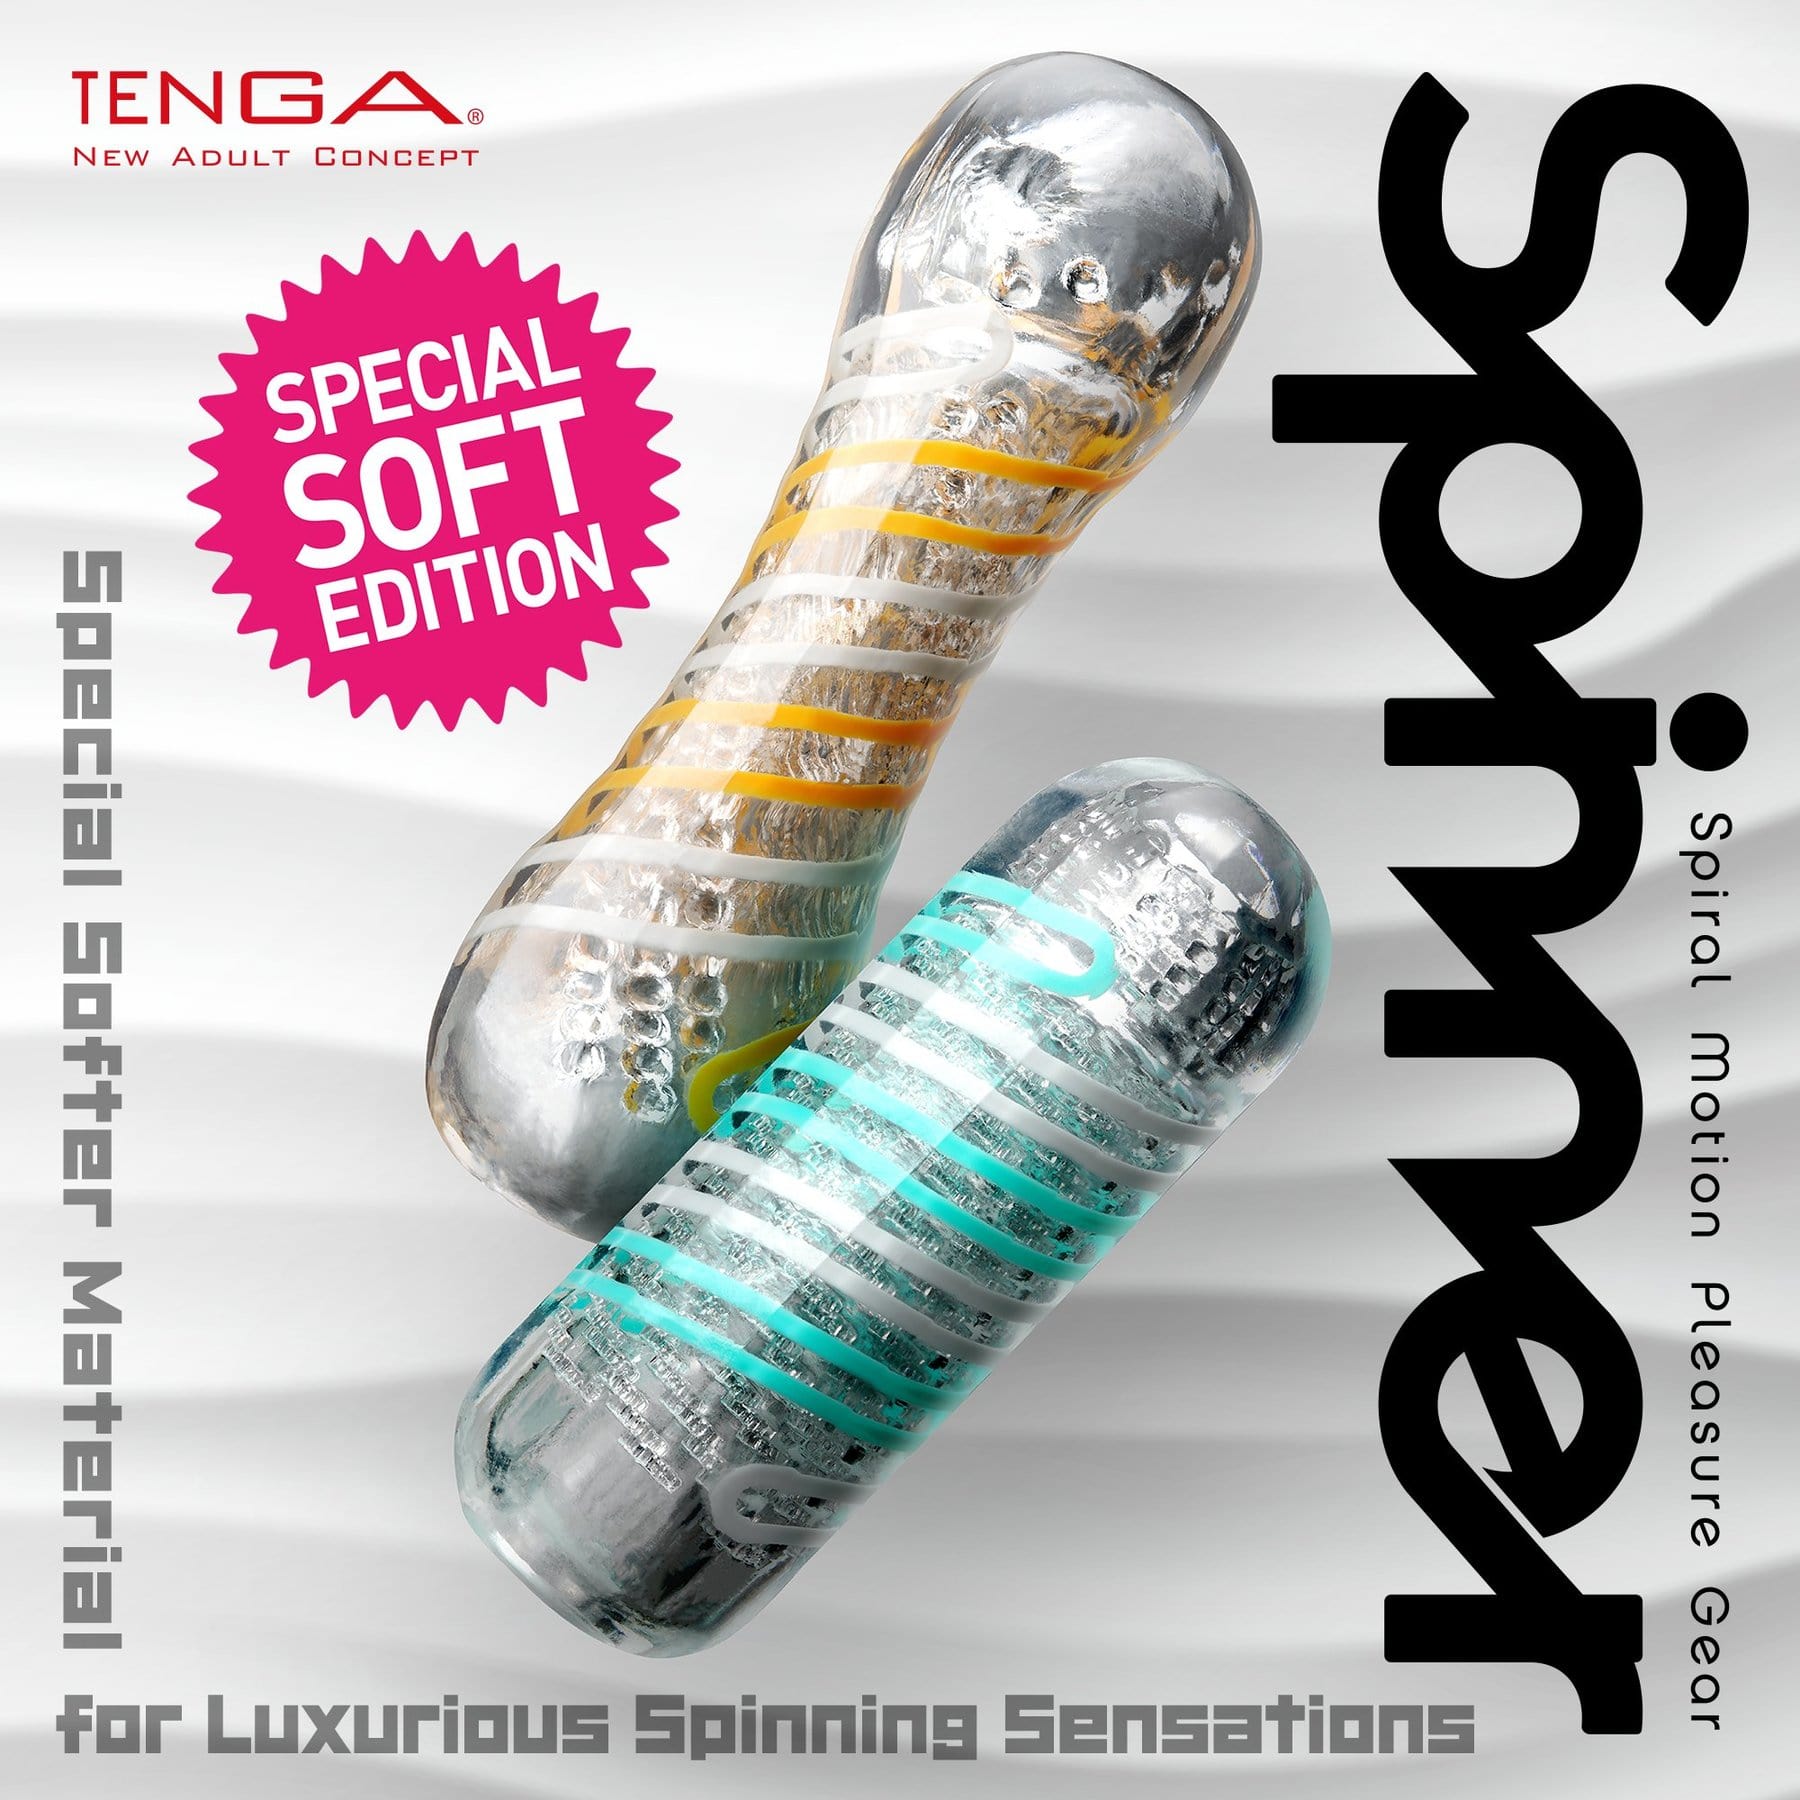 Tenga Spinner Special Soft Edition - 06 BRICK - Thorn & Feather